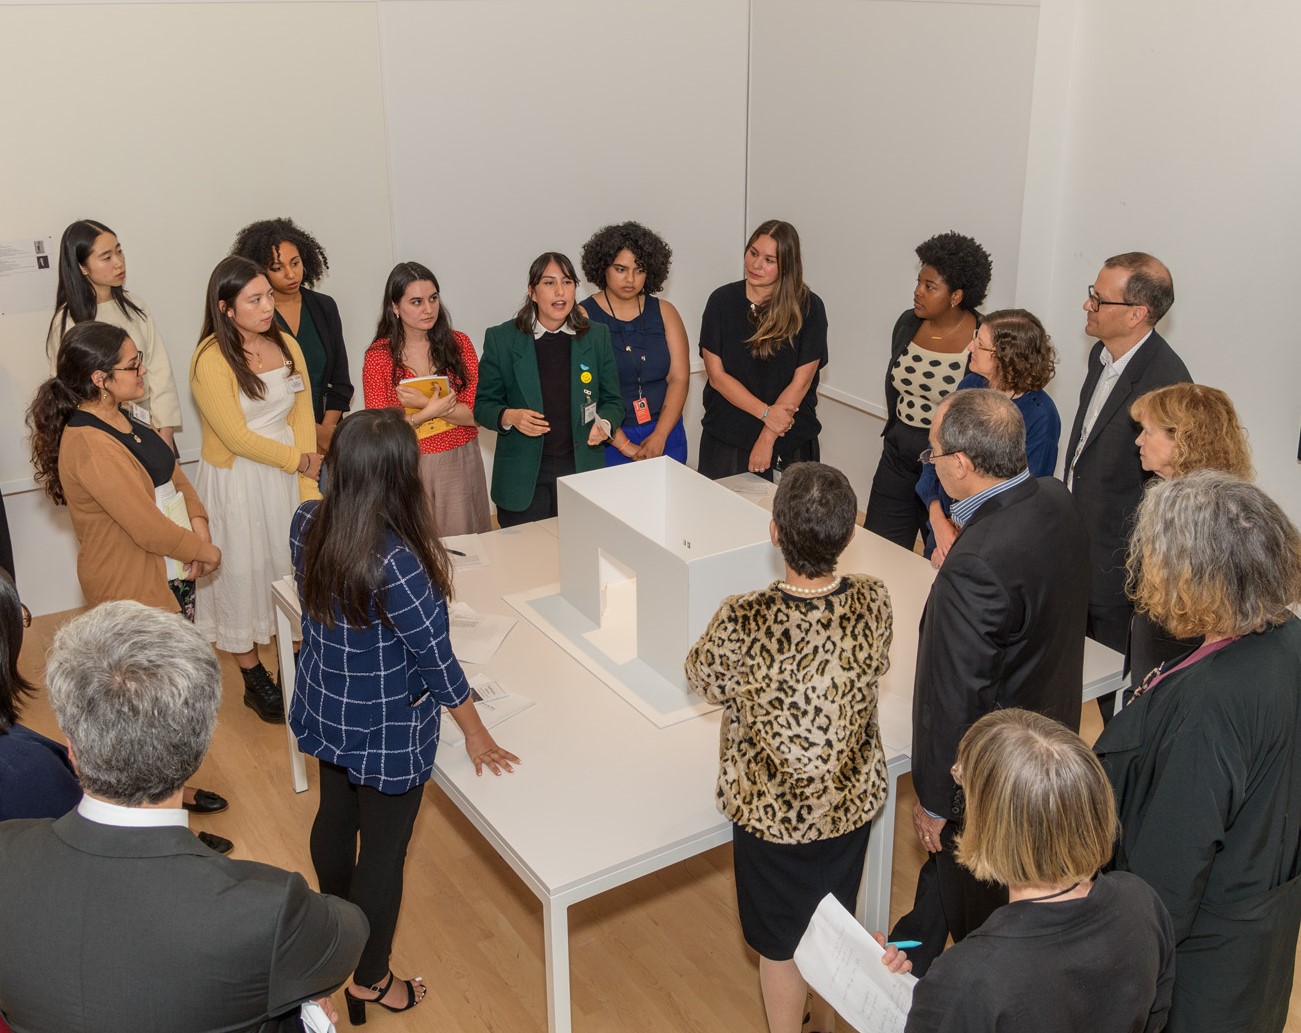 The 2019 Mellon Summer Academy group presenting their exhibition idea to the museum's director, the donor's family, and LACMA staff, photo © Museum Associates/LACMA